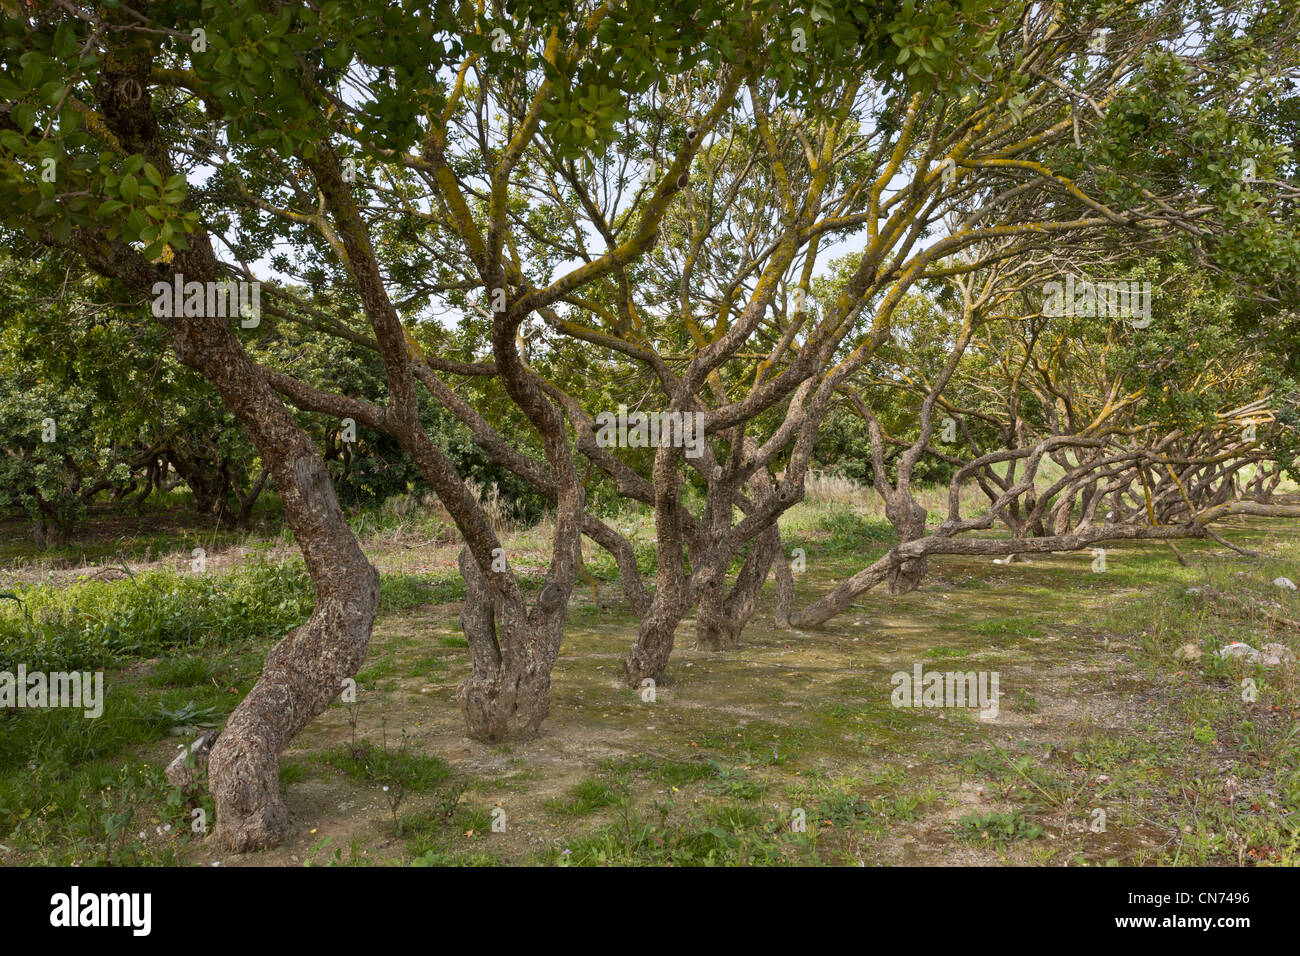 Mastic trees, Pistacia lentiscus var chia in cultivation on the greek island of Chios, Greece. Stock Photo